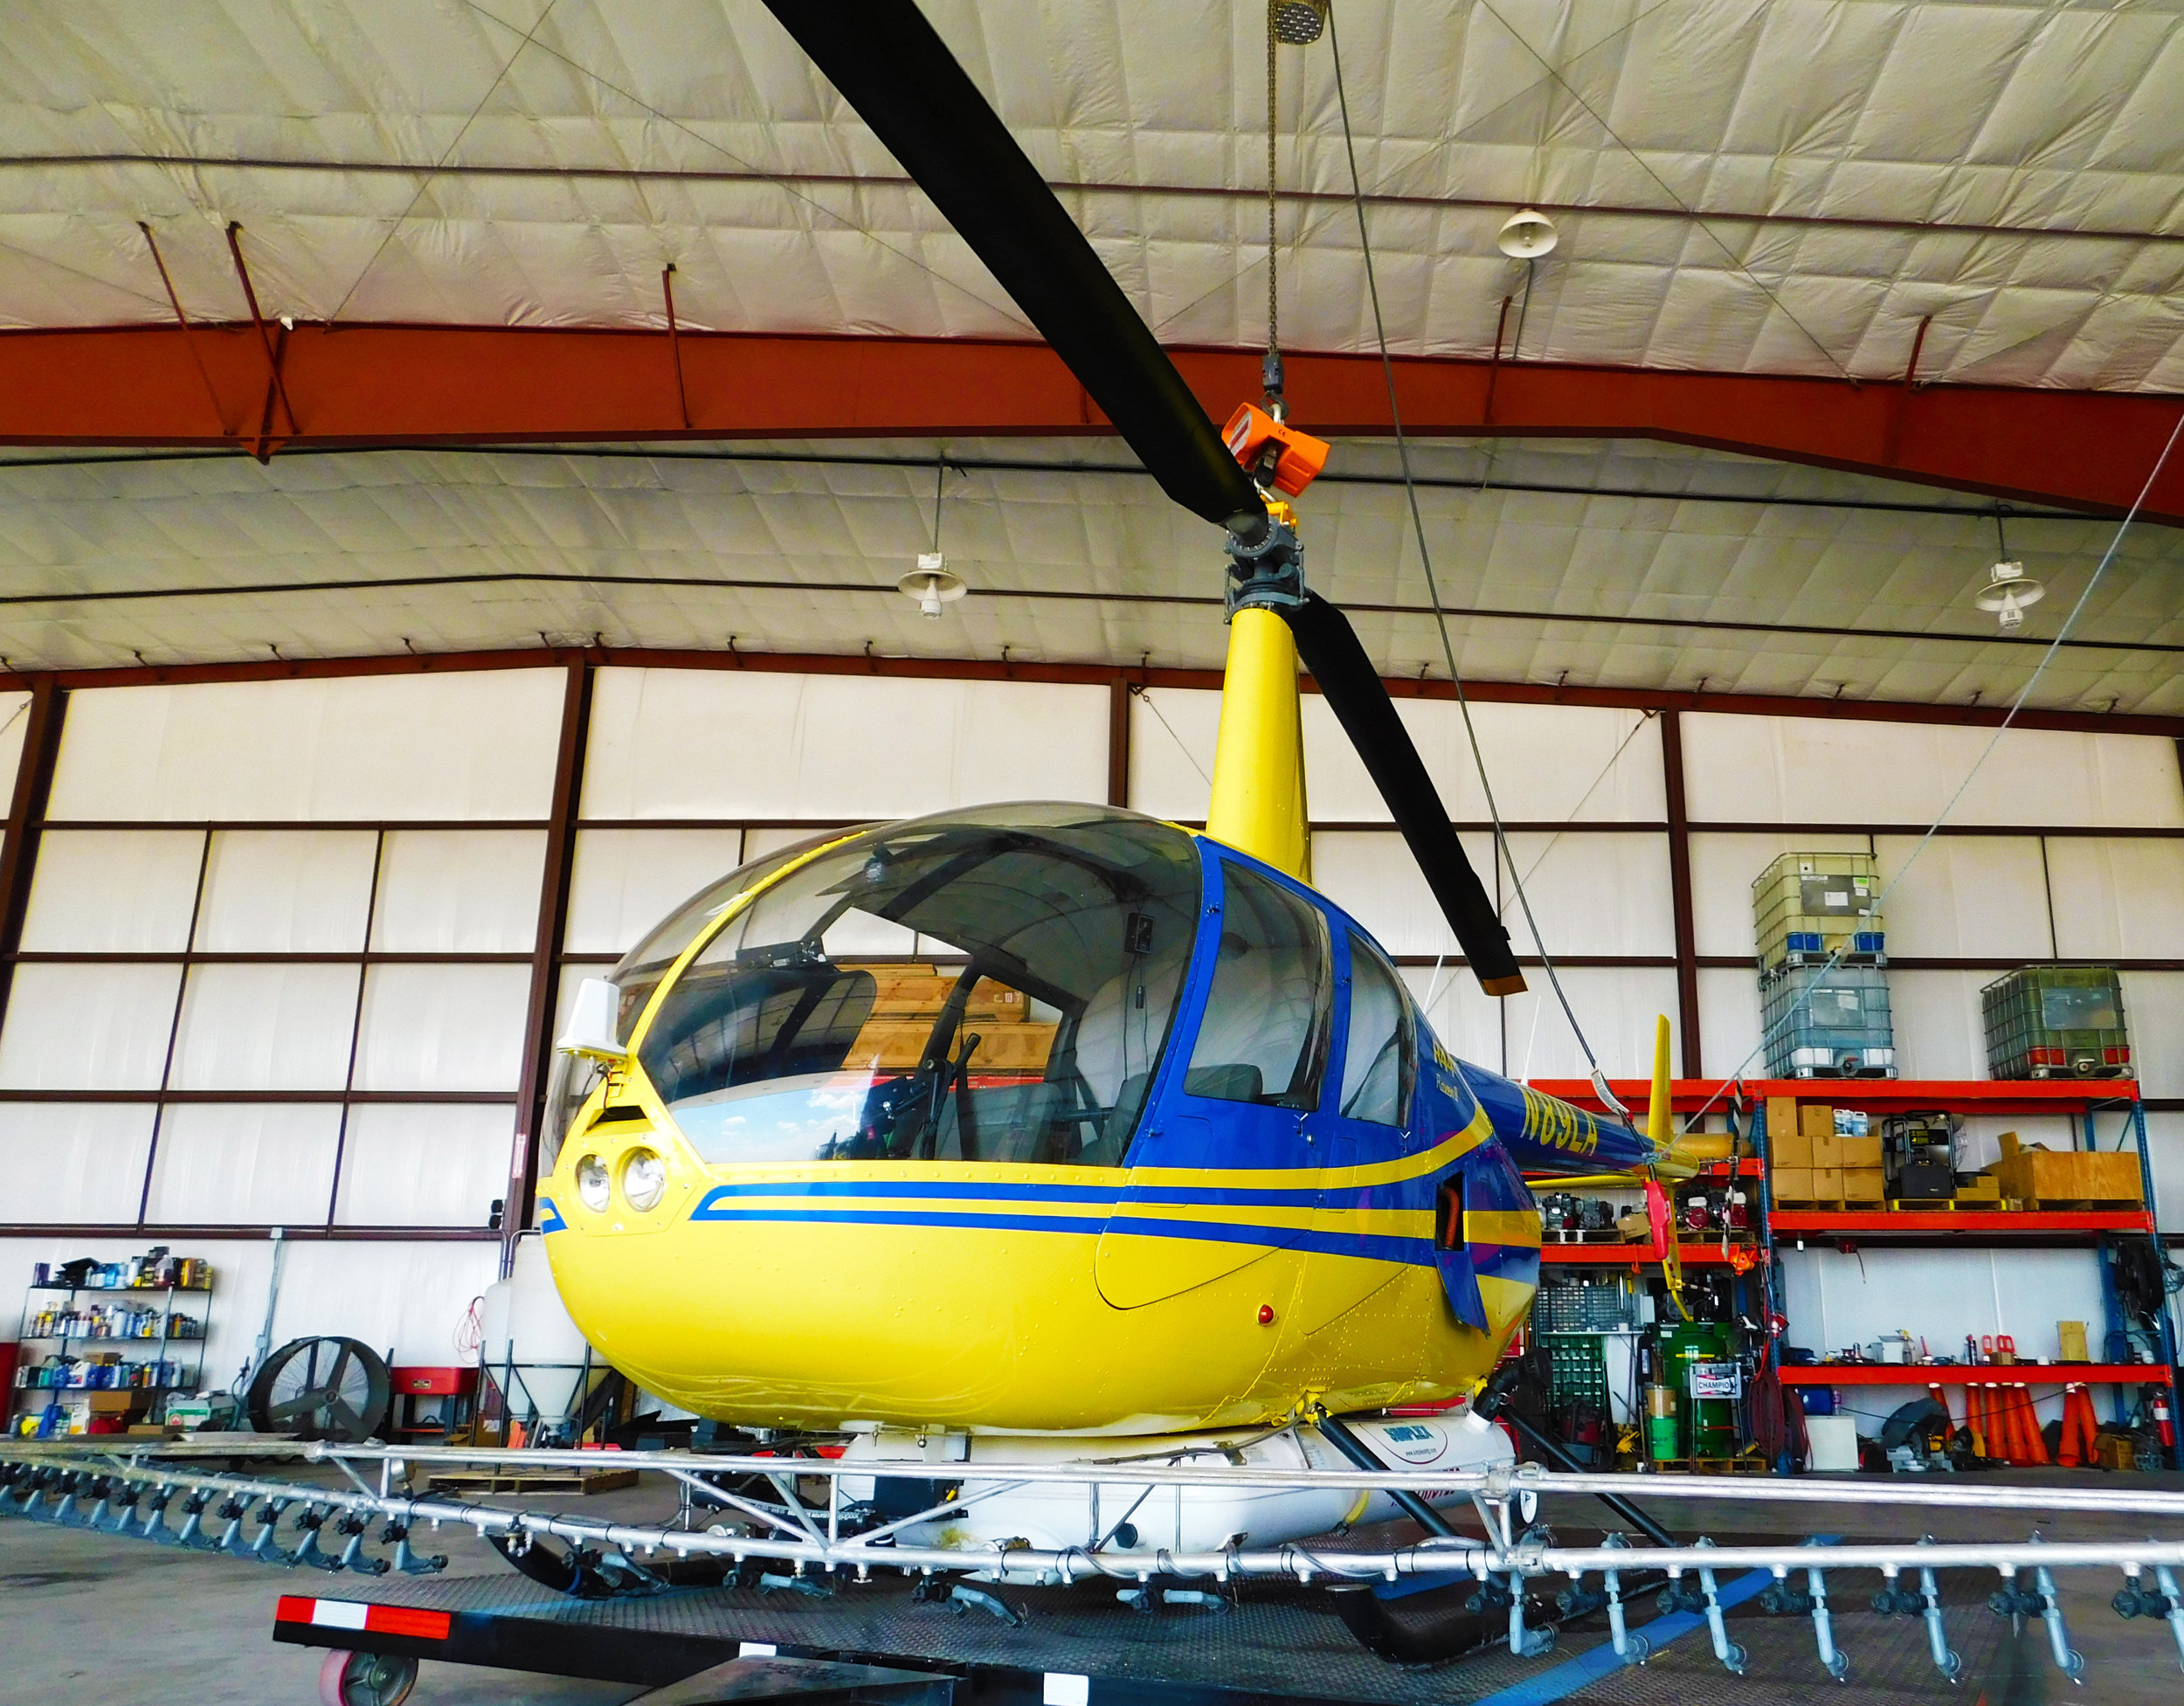   Johnson owns a local helicopter service where he flies on cover crops and pesticides.  